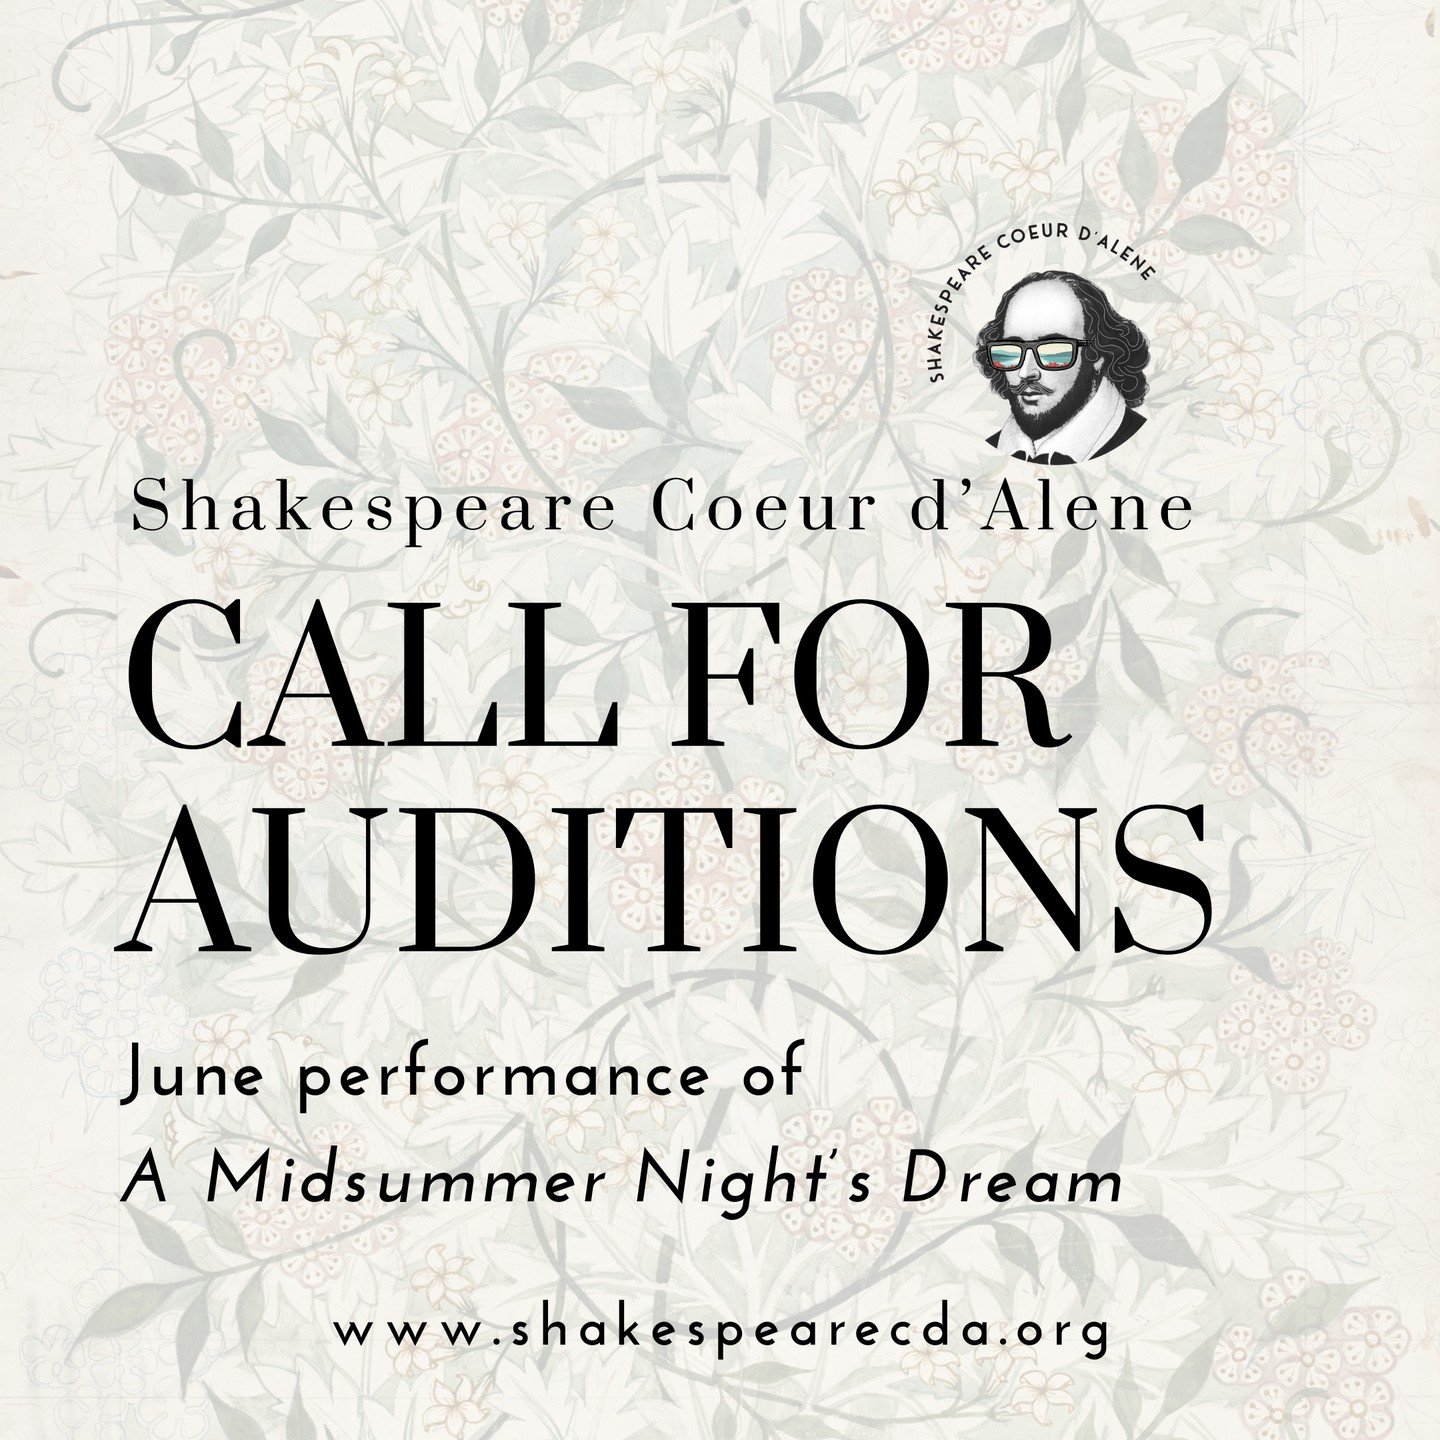 The moment you have all been waiting for is finally here... it's time to AUDITION!

Shakespeare Coeur d'Alene is thrilled to announce auditions for our upcoming June production of &quot;A Midsummer Night's Dream&quot;!

For months, we've been immersi